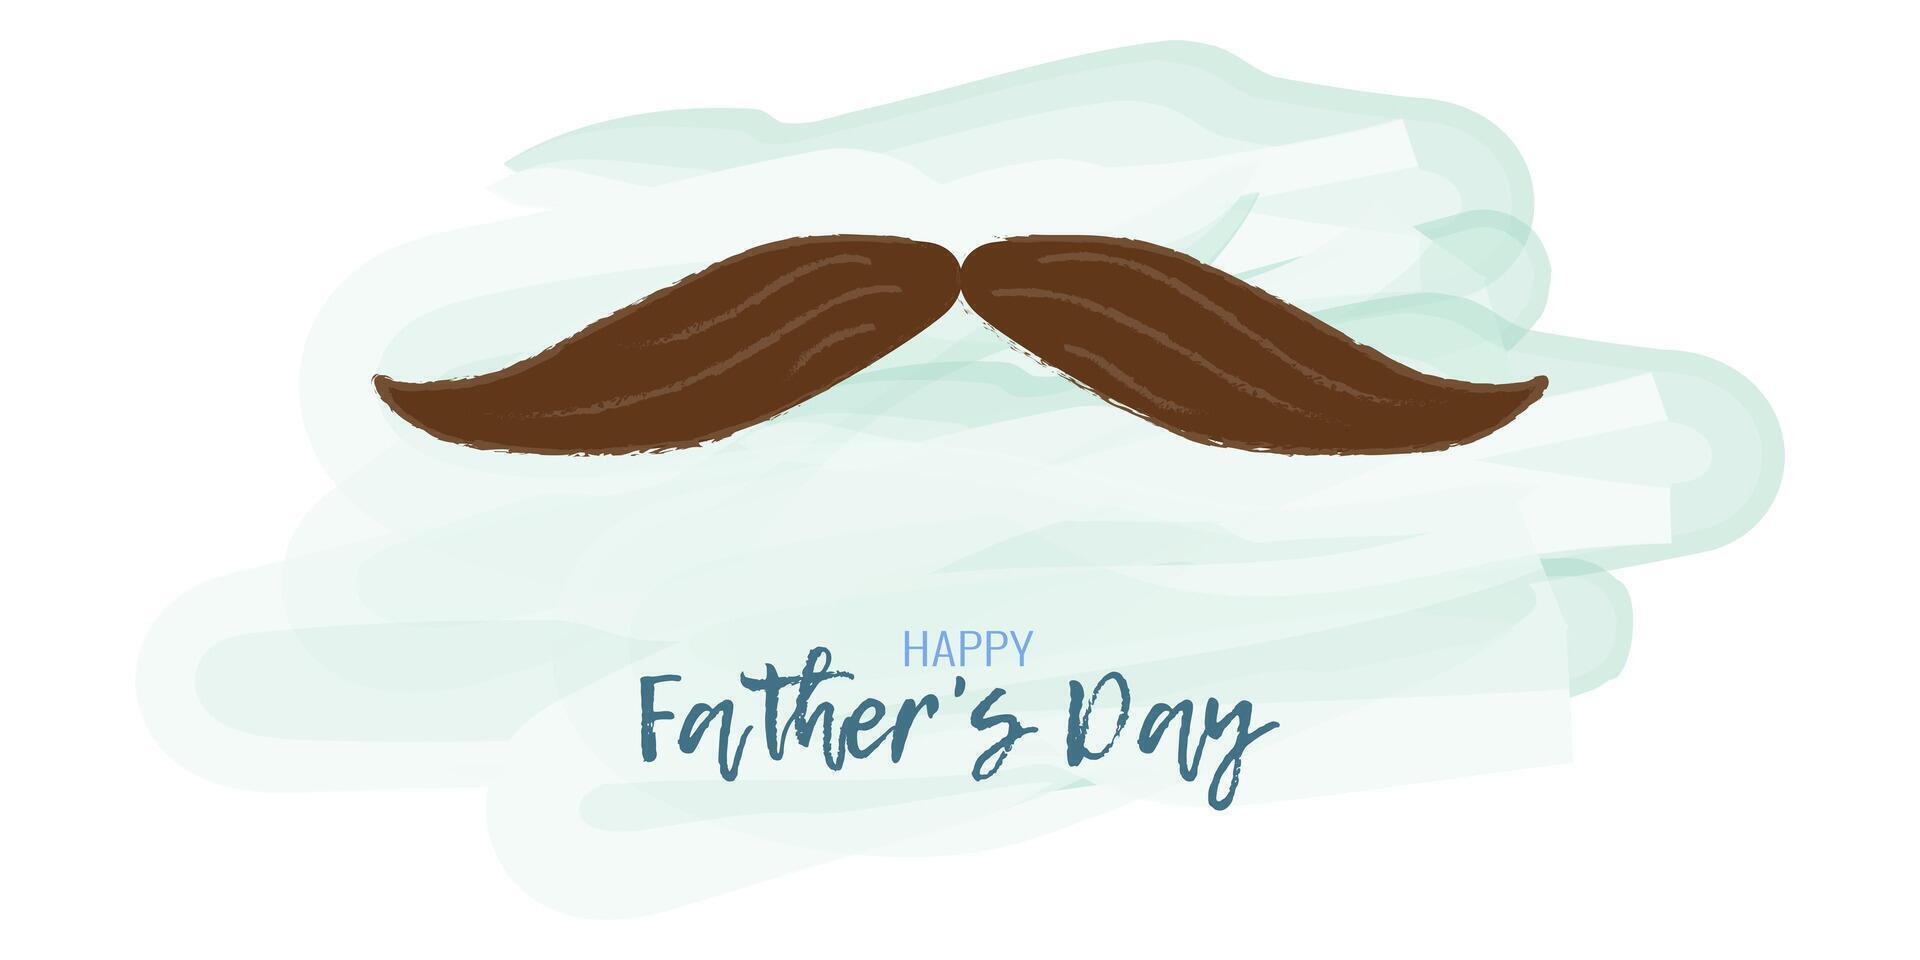 Templates  Father Day holiday in watercolor style. vector